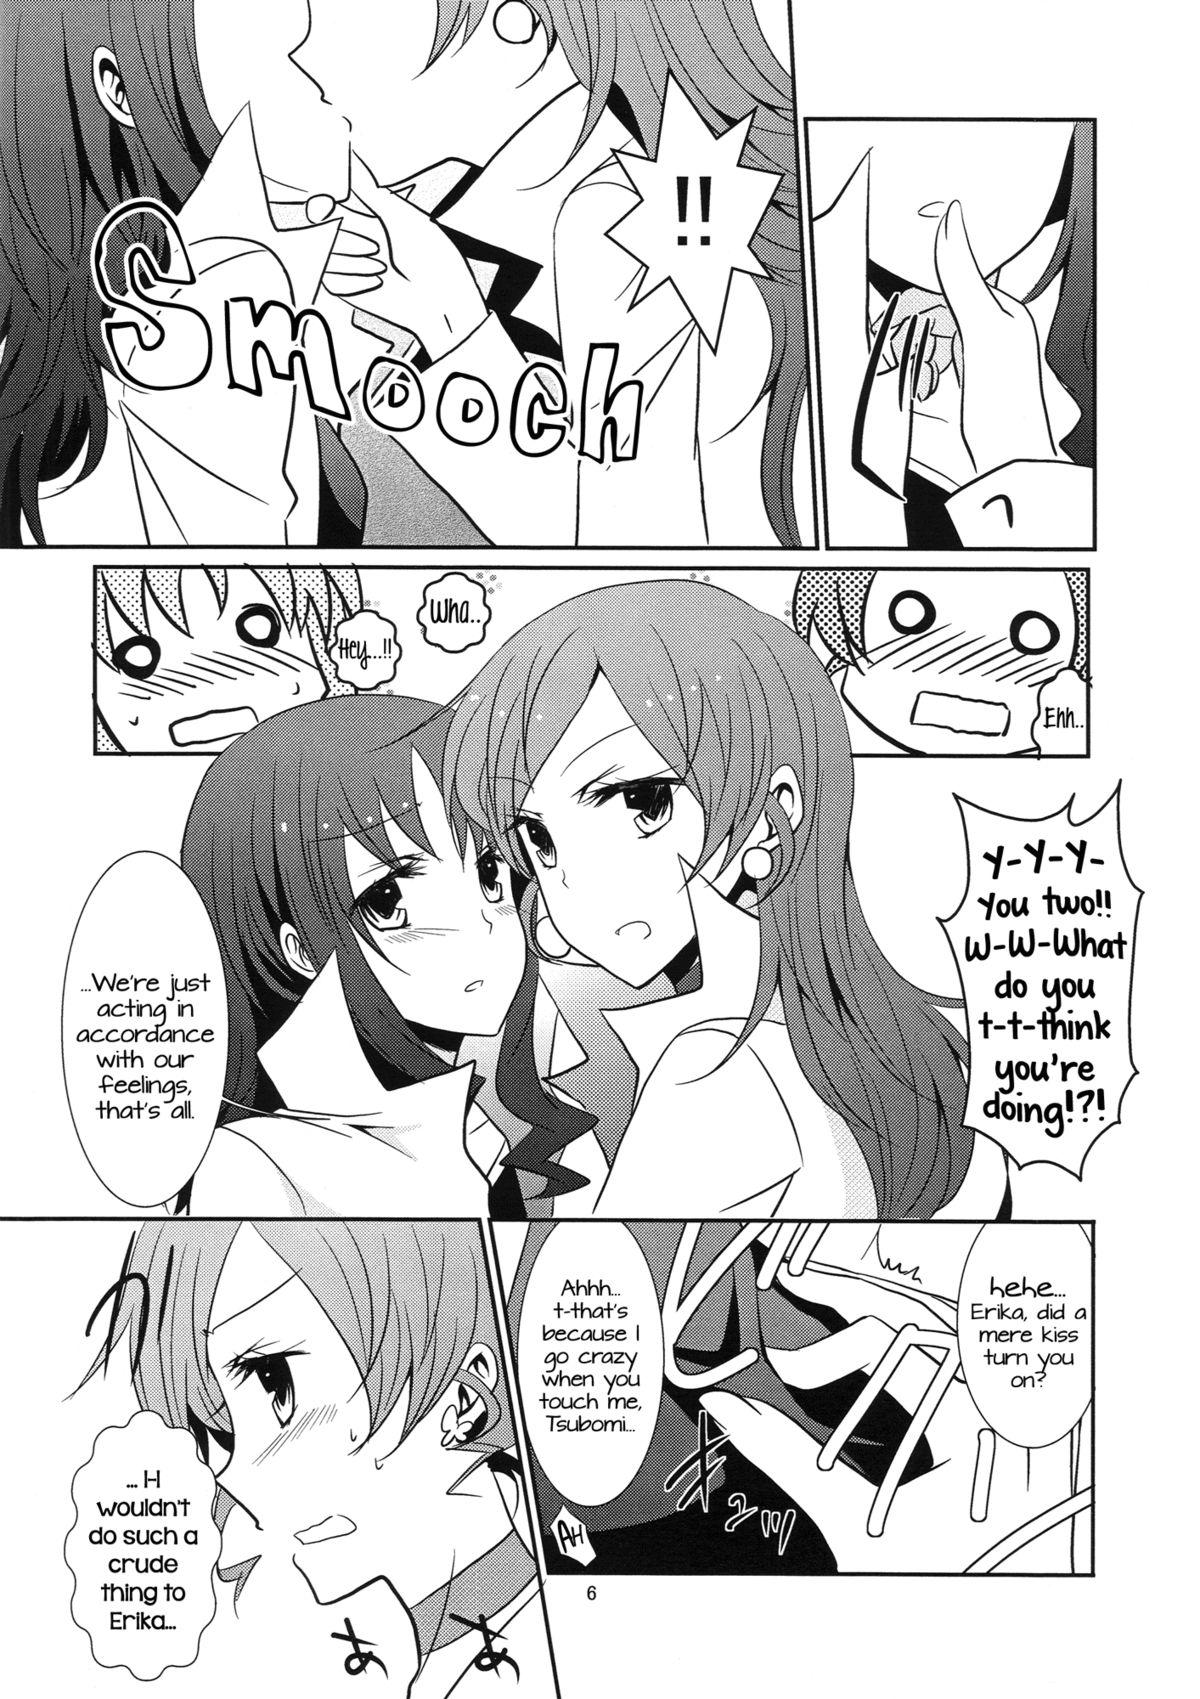 Gaysex 4ever Yours - Heartcatch precure Goth - Page 7